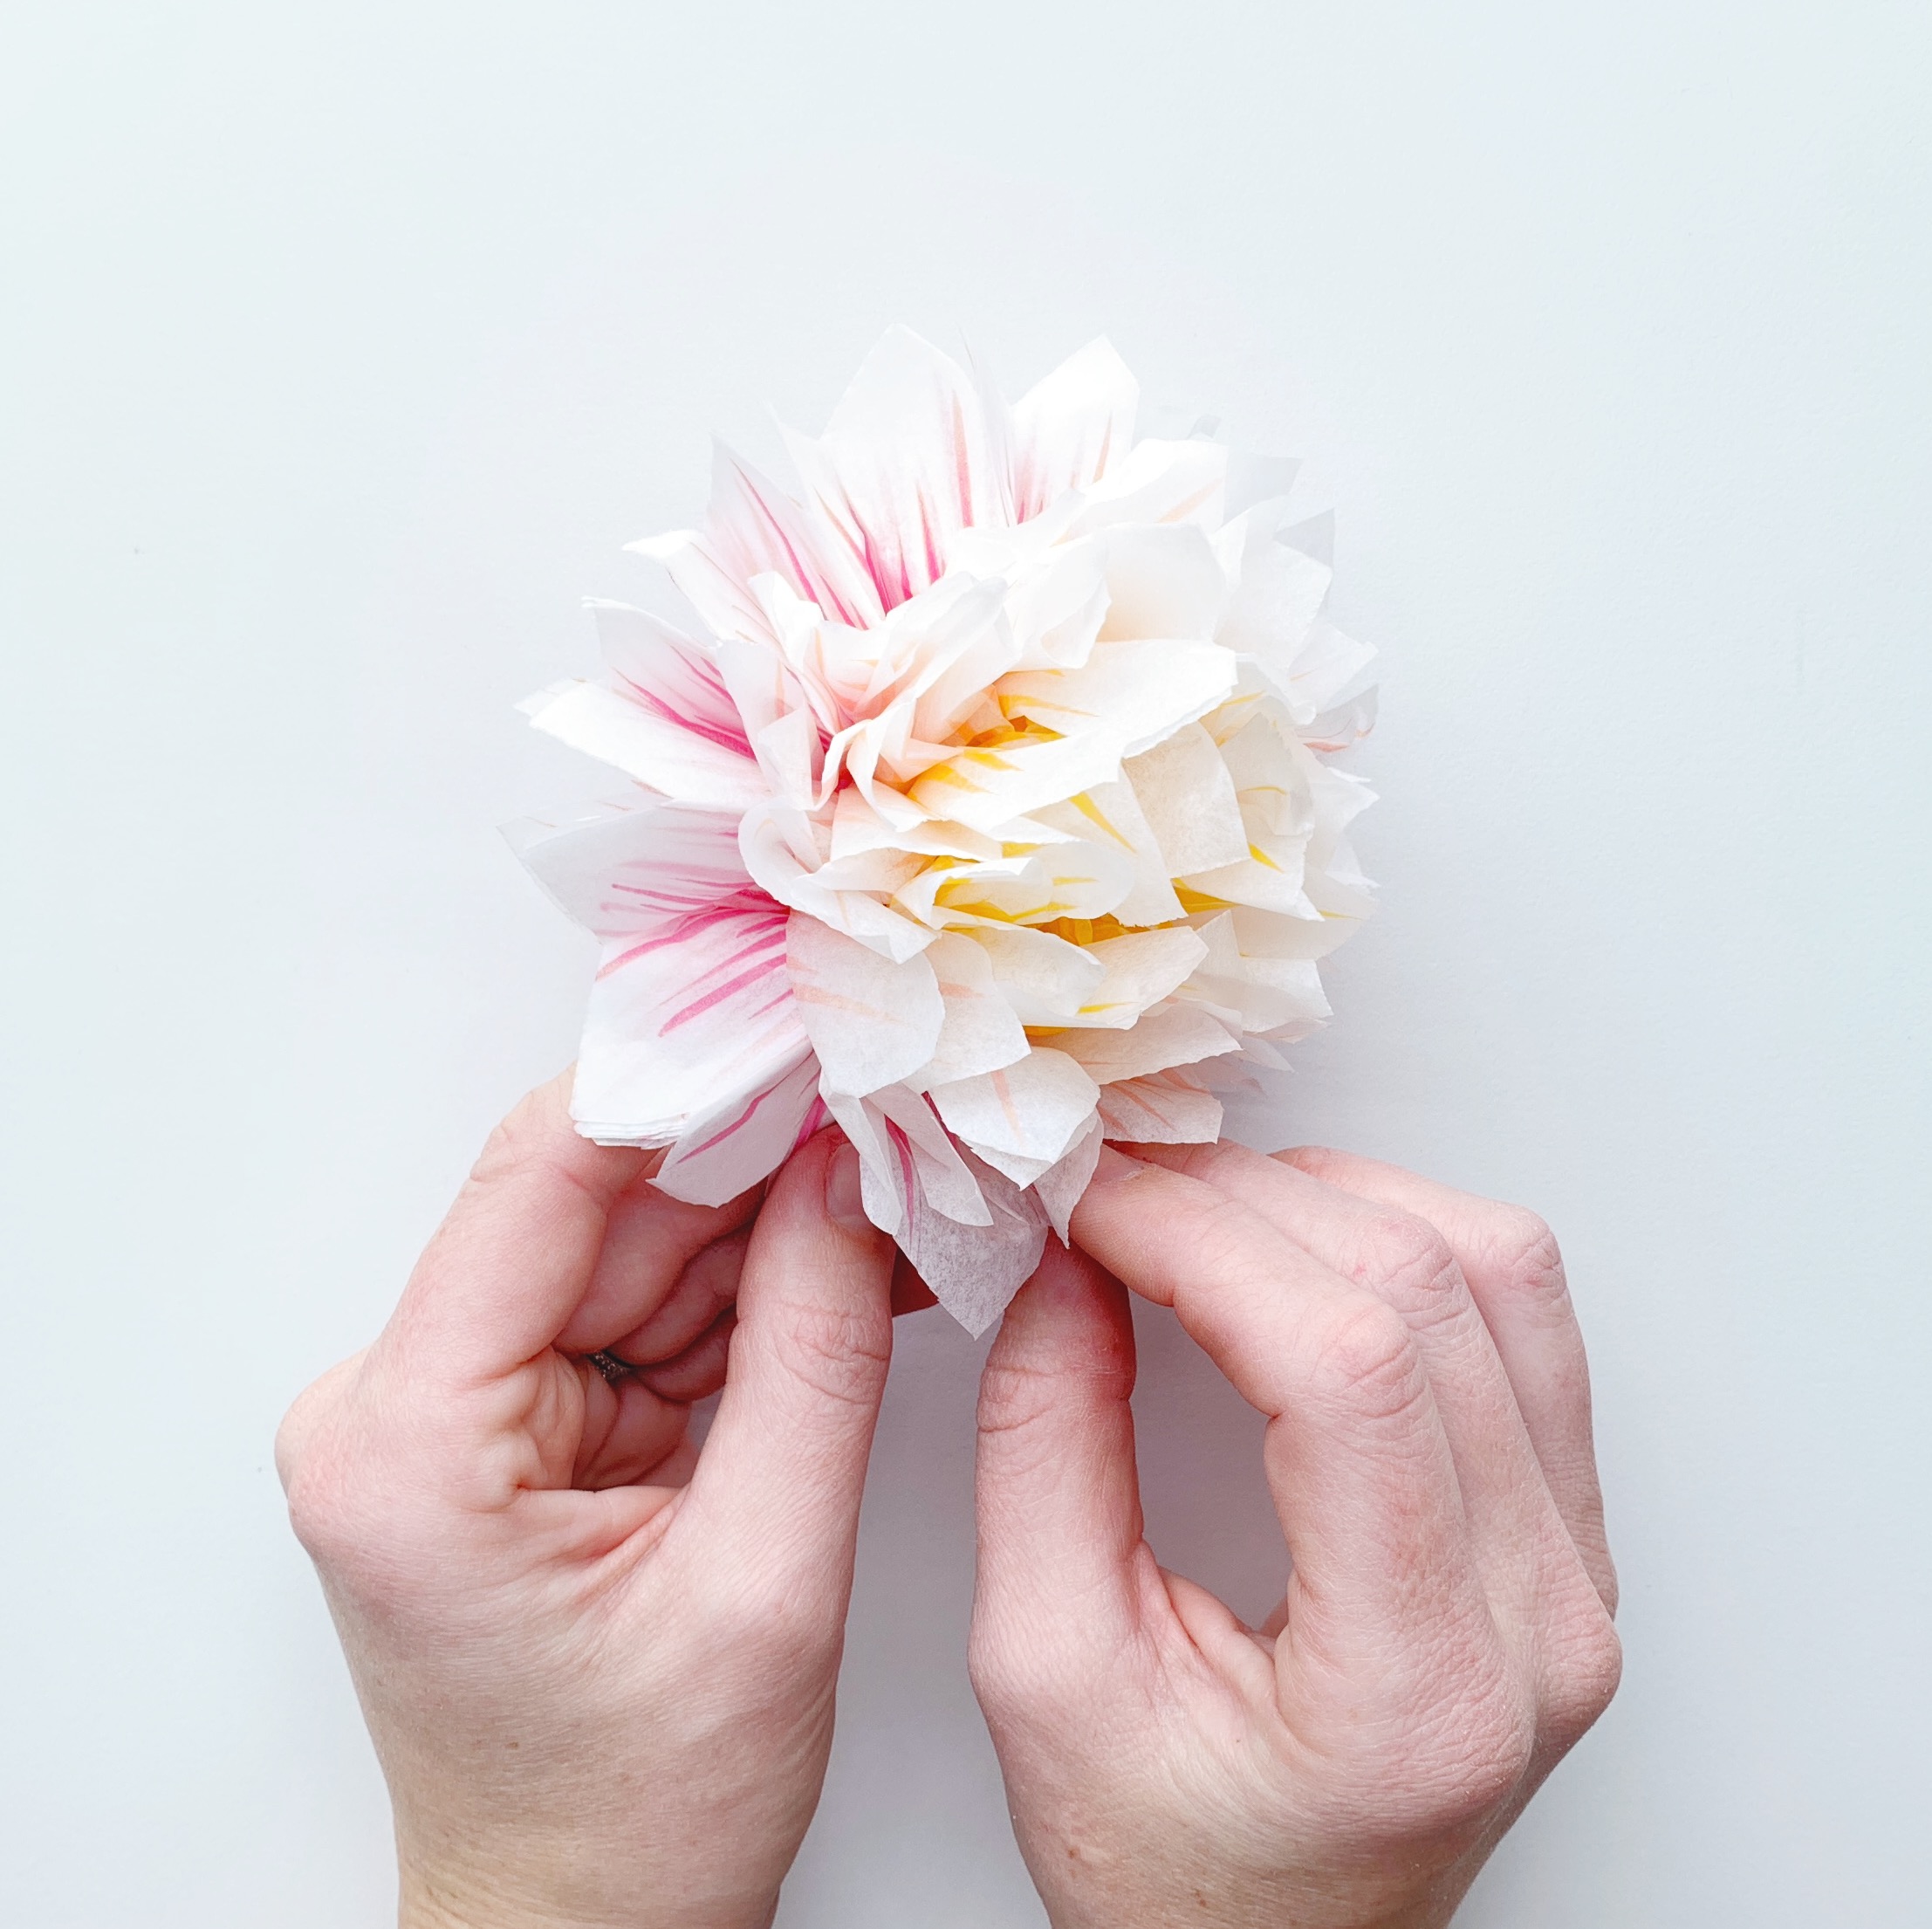 Learn how to make tissue paper dahlia flowers using @tombowusa Dual Brush Pens with Adrienne from @studio80design